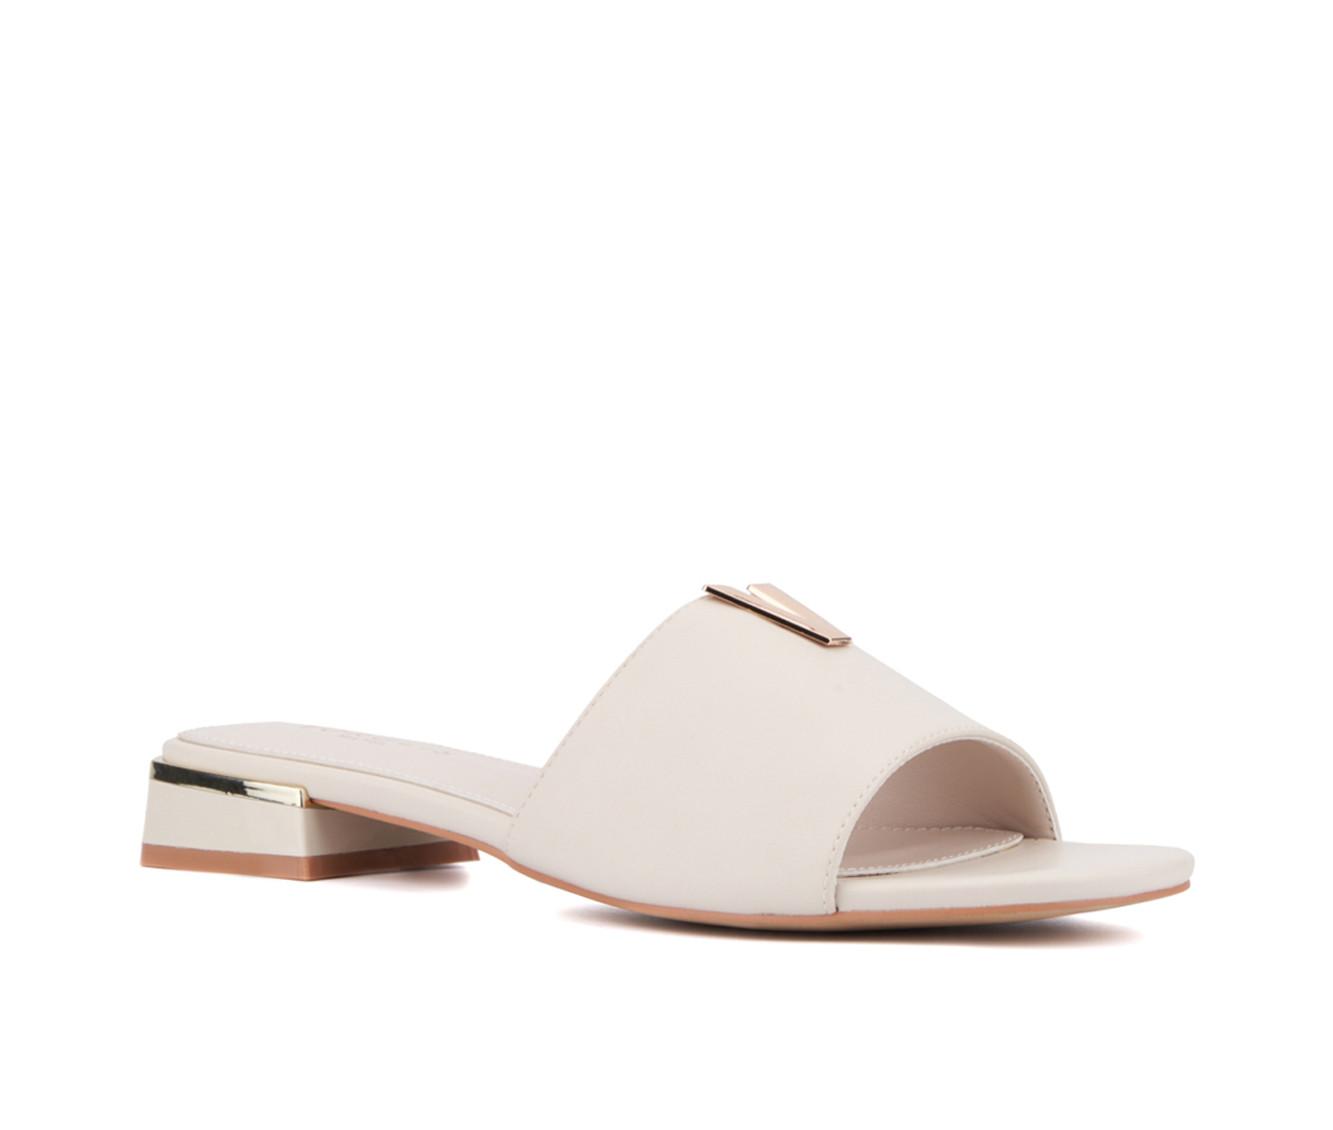 Women's Torgeis Giselle Sandals